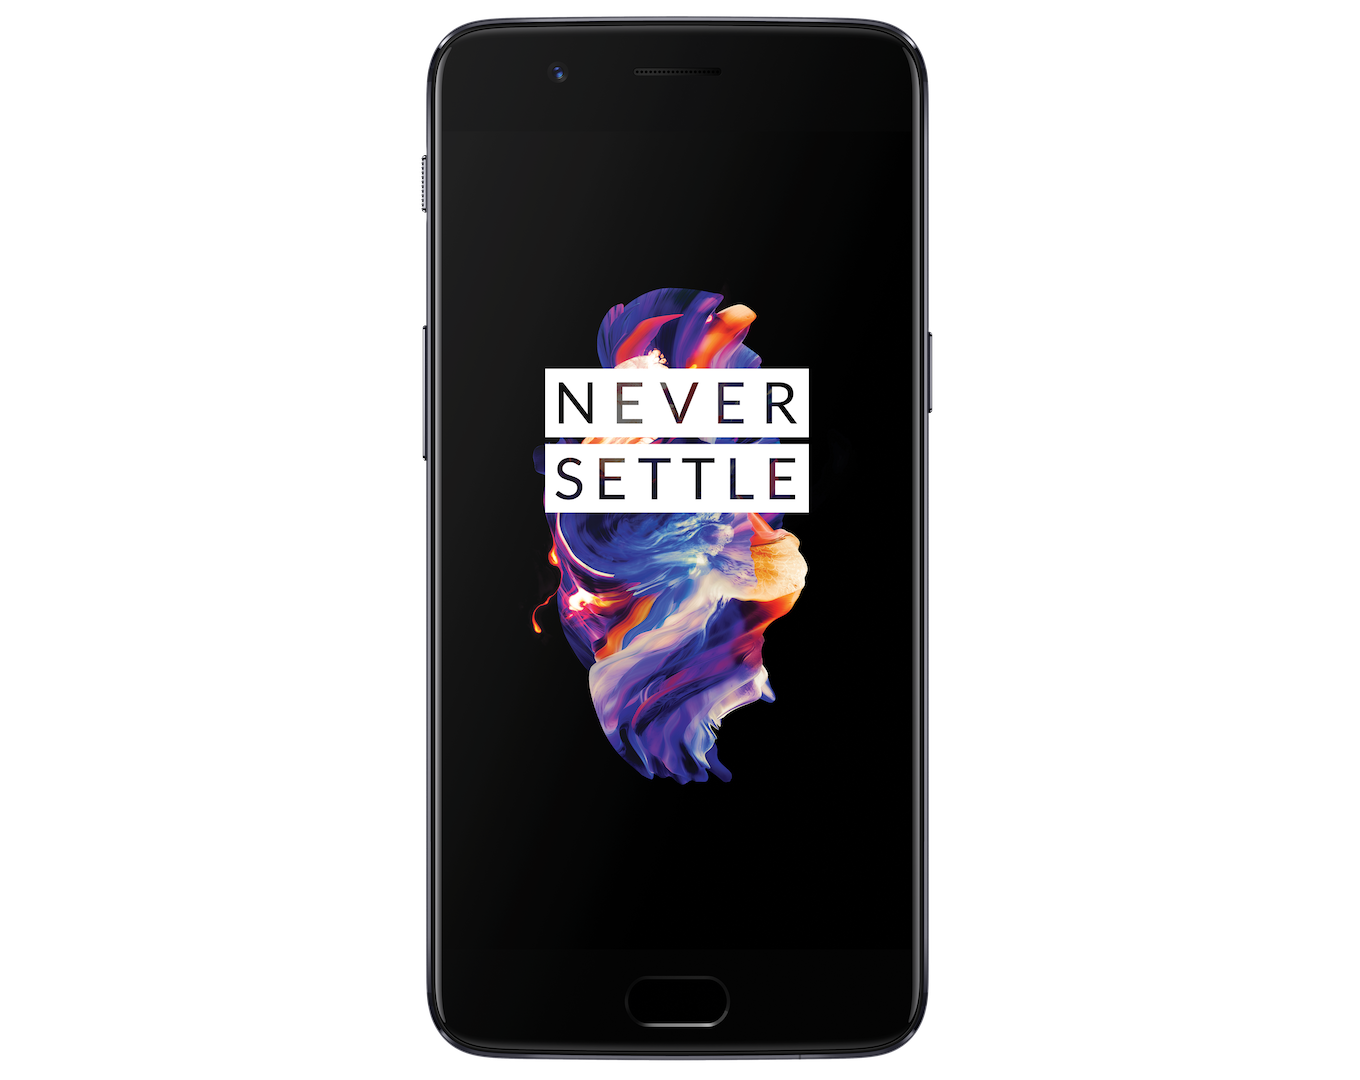 The Official Wallpapers For The Oneplus 5 Are Designed - Oneplus 5 128gb , HD Wallpaper & Backgrounds